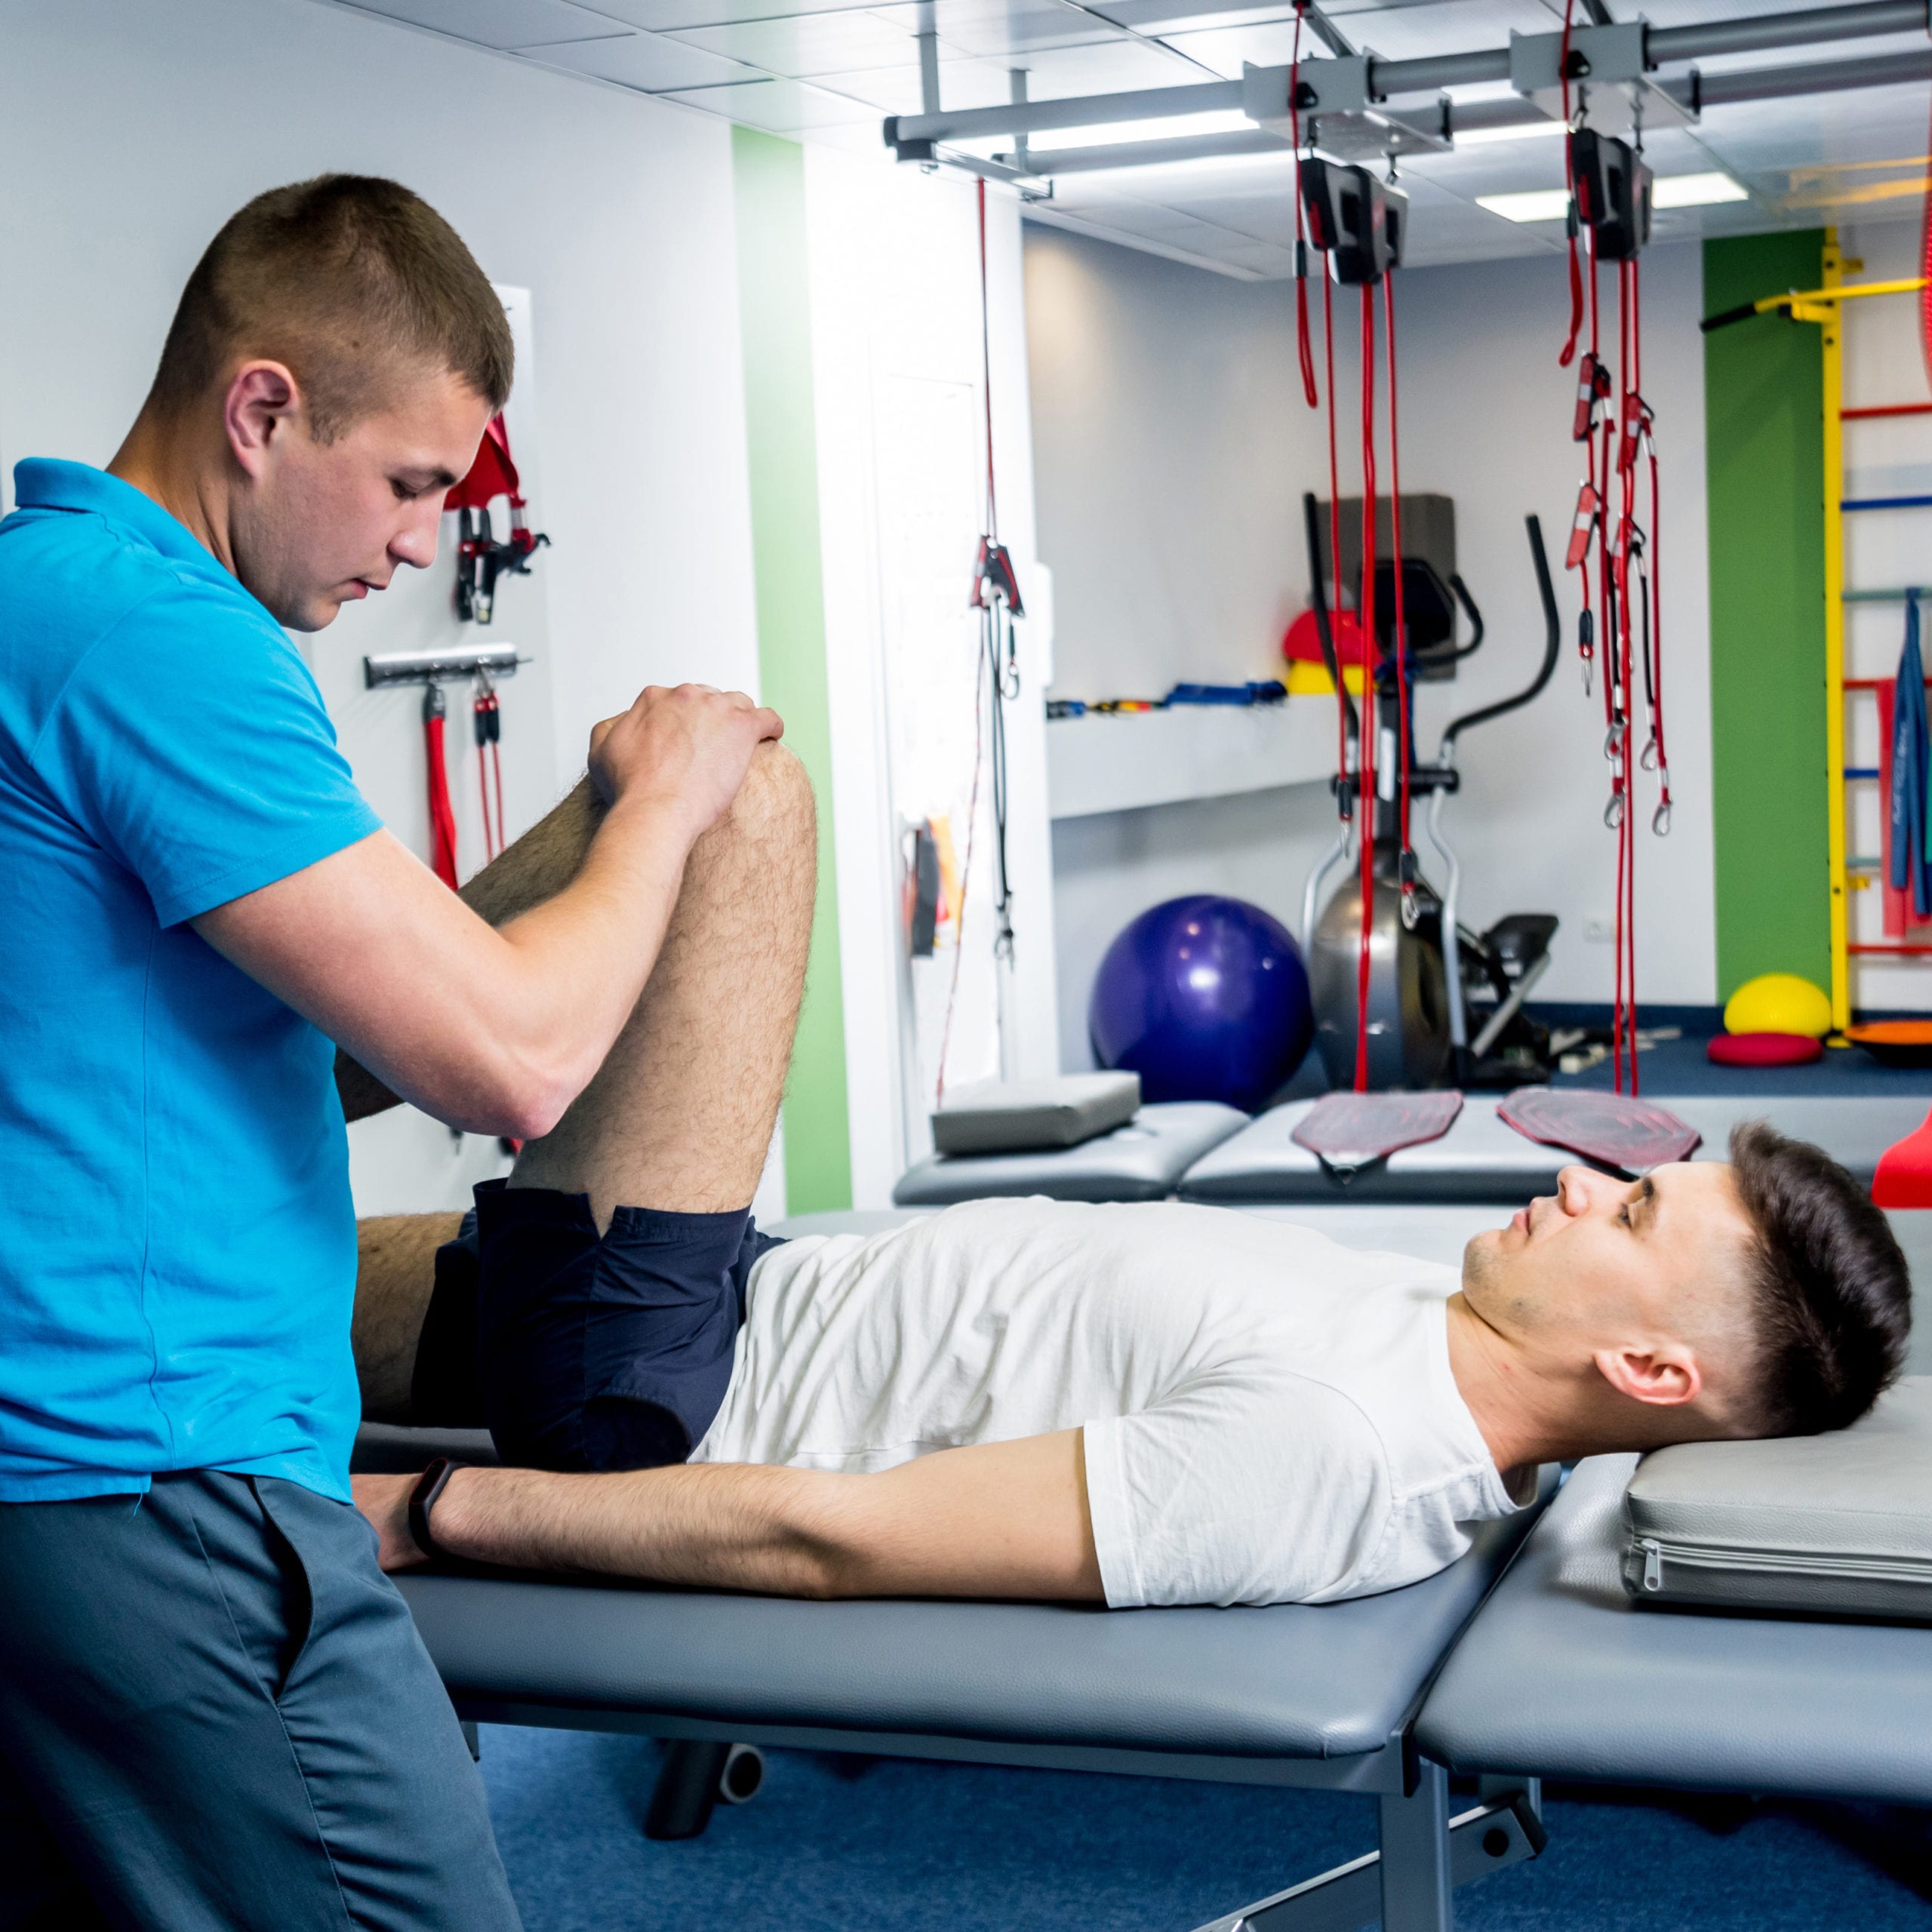 Why Do I Get 'Stimulated' During Physical Therapy? - Boston Sports Medicine